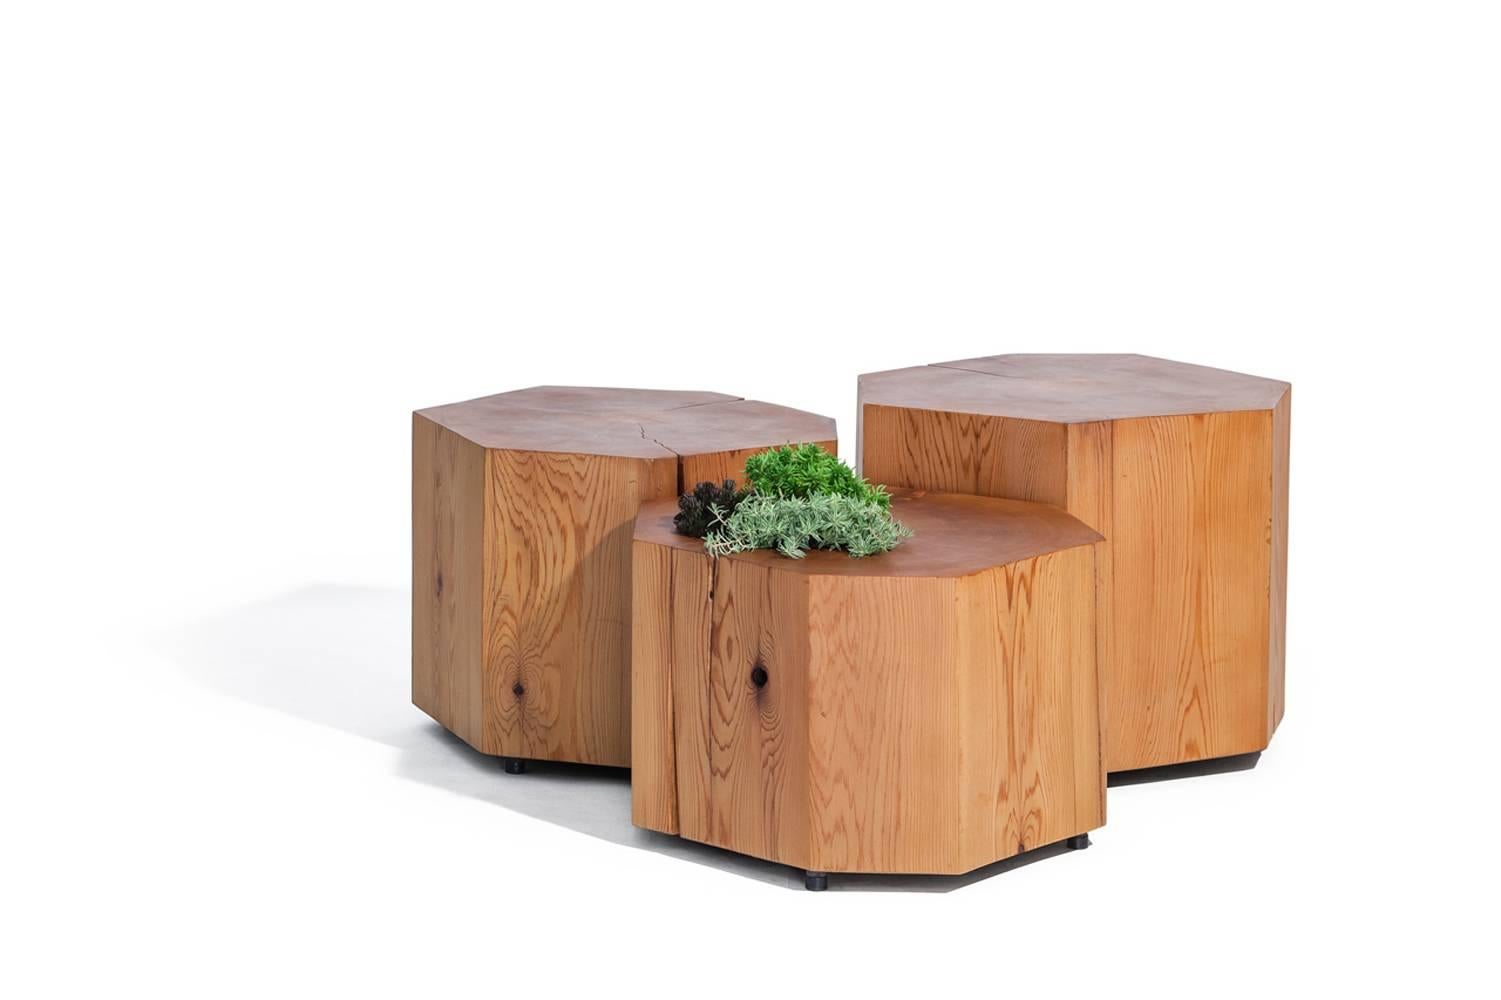 Canadian Table in Natural Red Cedar with Planter Insert by Hinterland Design For Sale